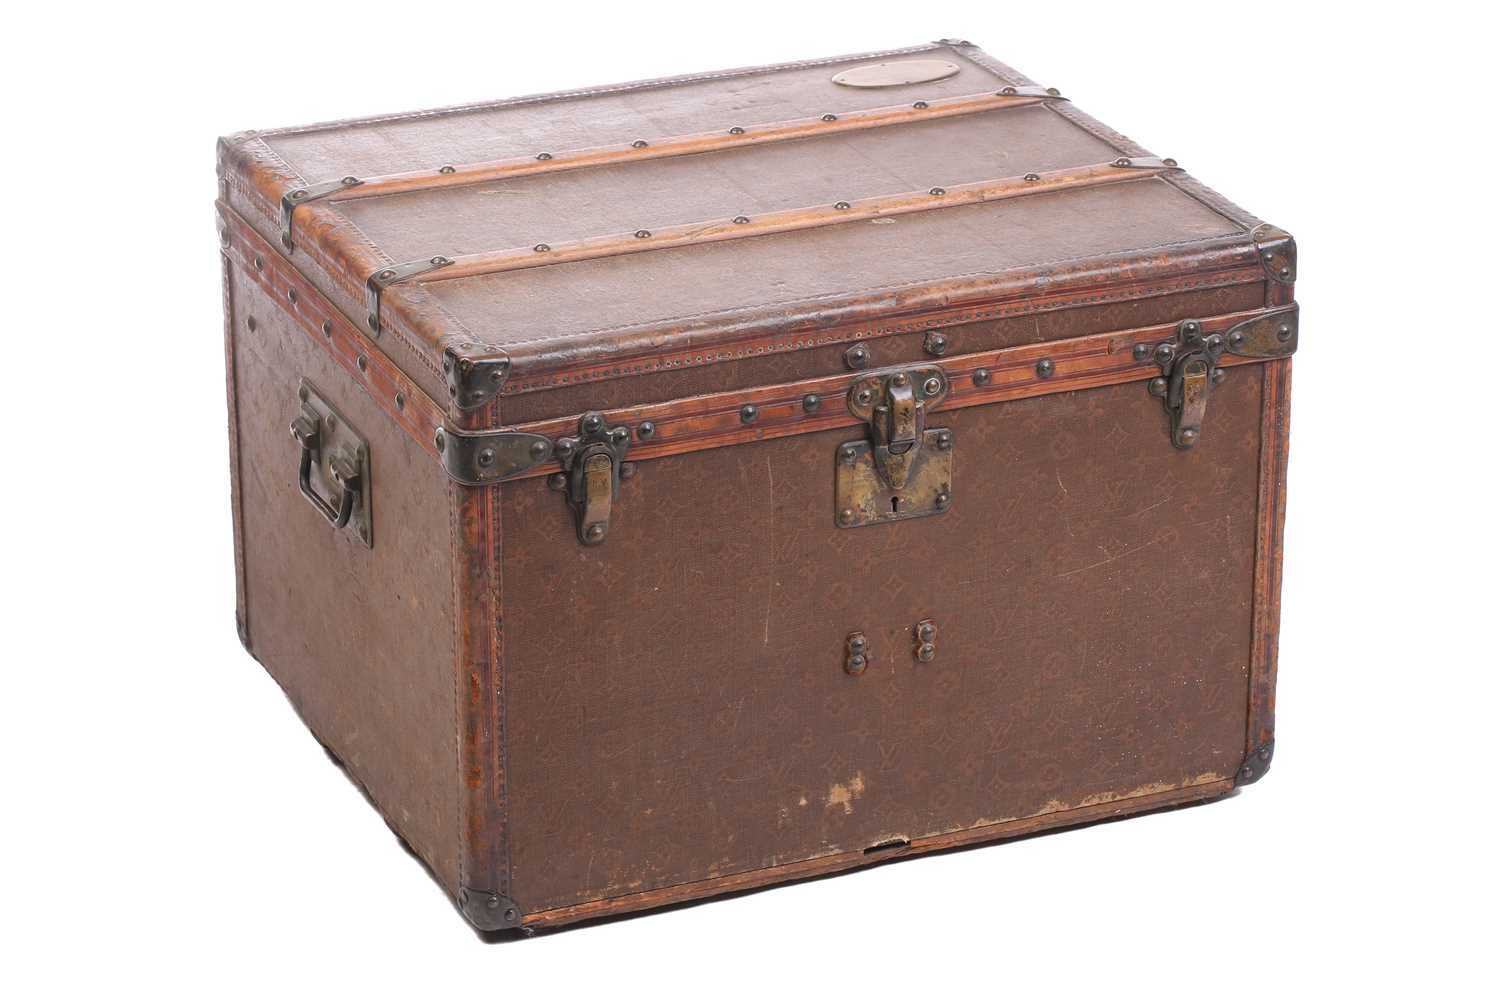 Sold at Auction: Louis Vuitton steamer trunk